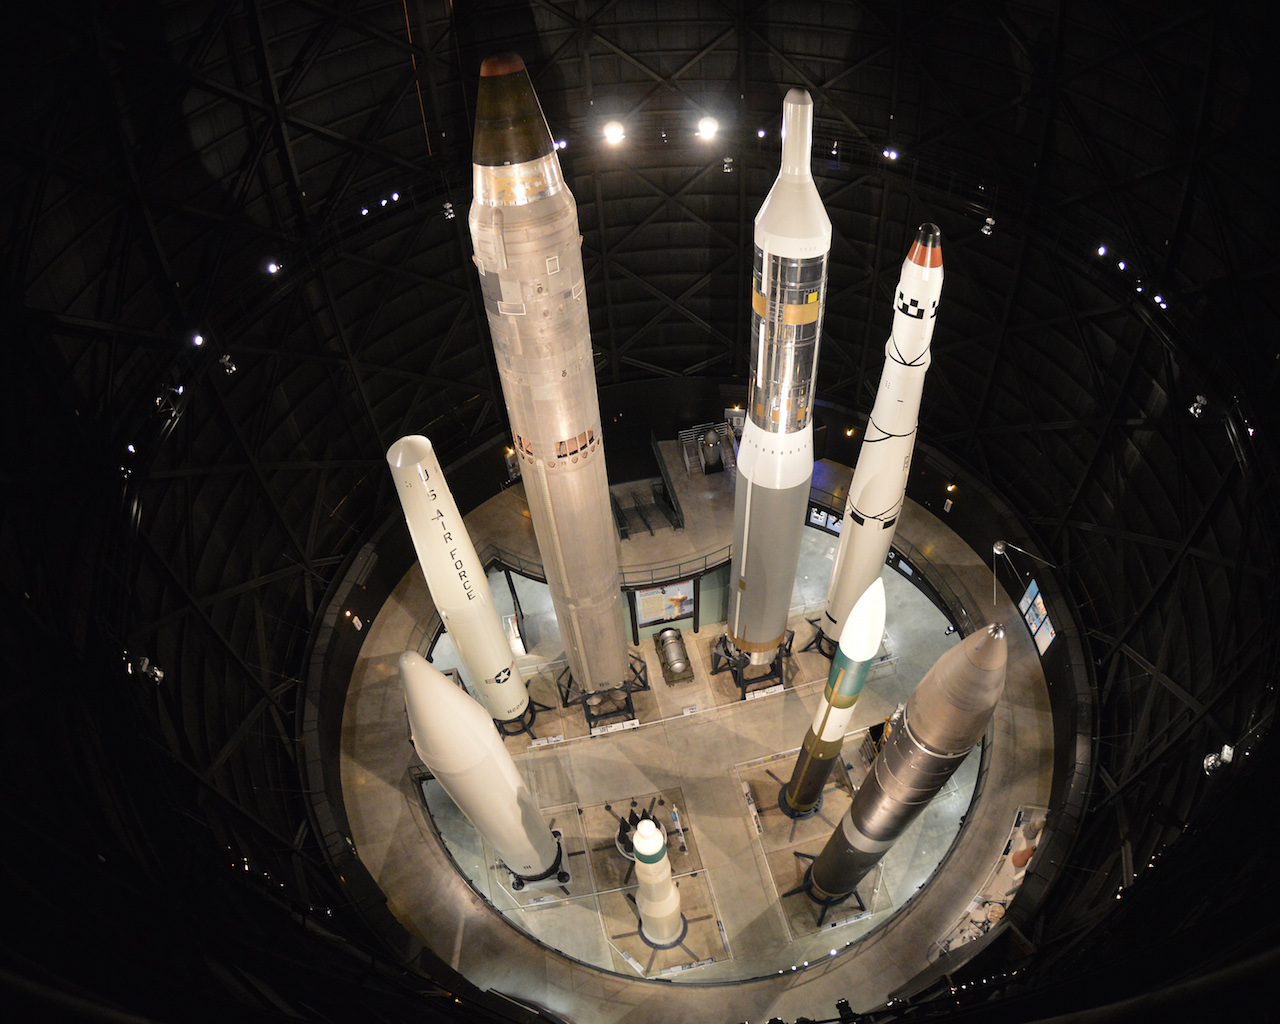 Missile and Space Gallery overview at the National Museum of the U.S. Air Force. (U.S. Air Force photo) 